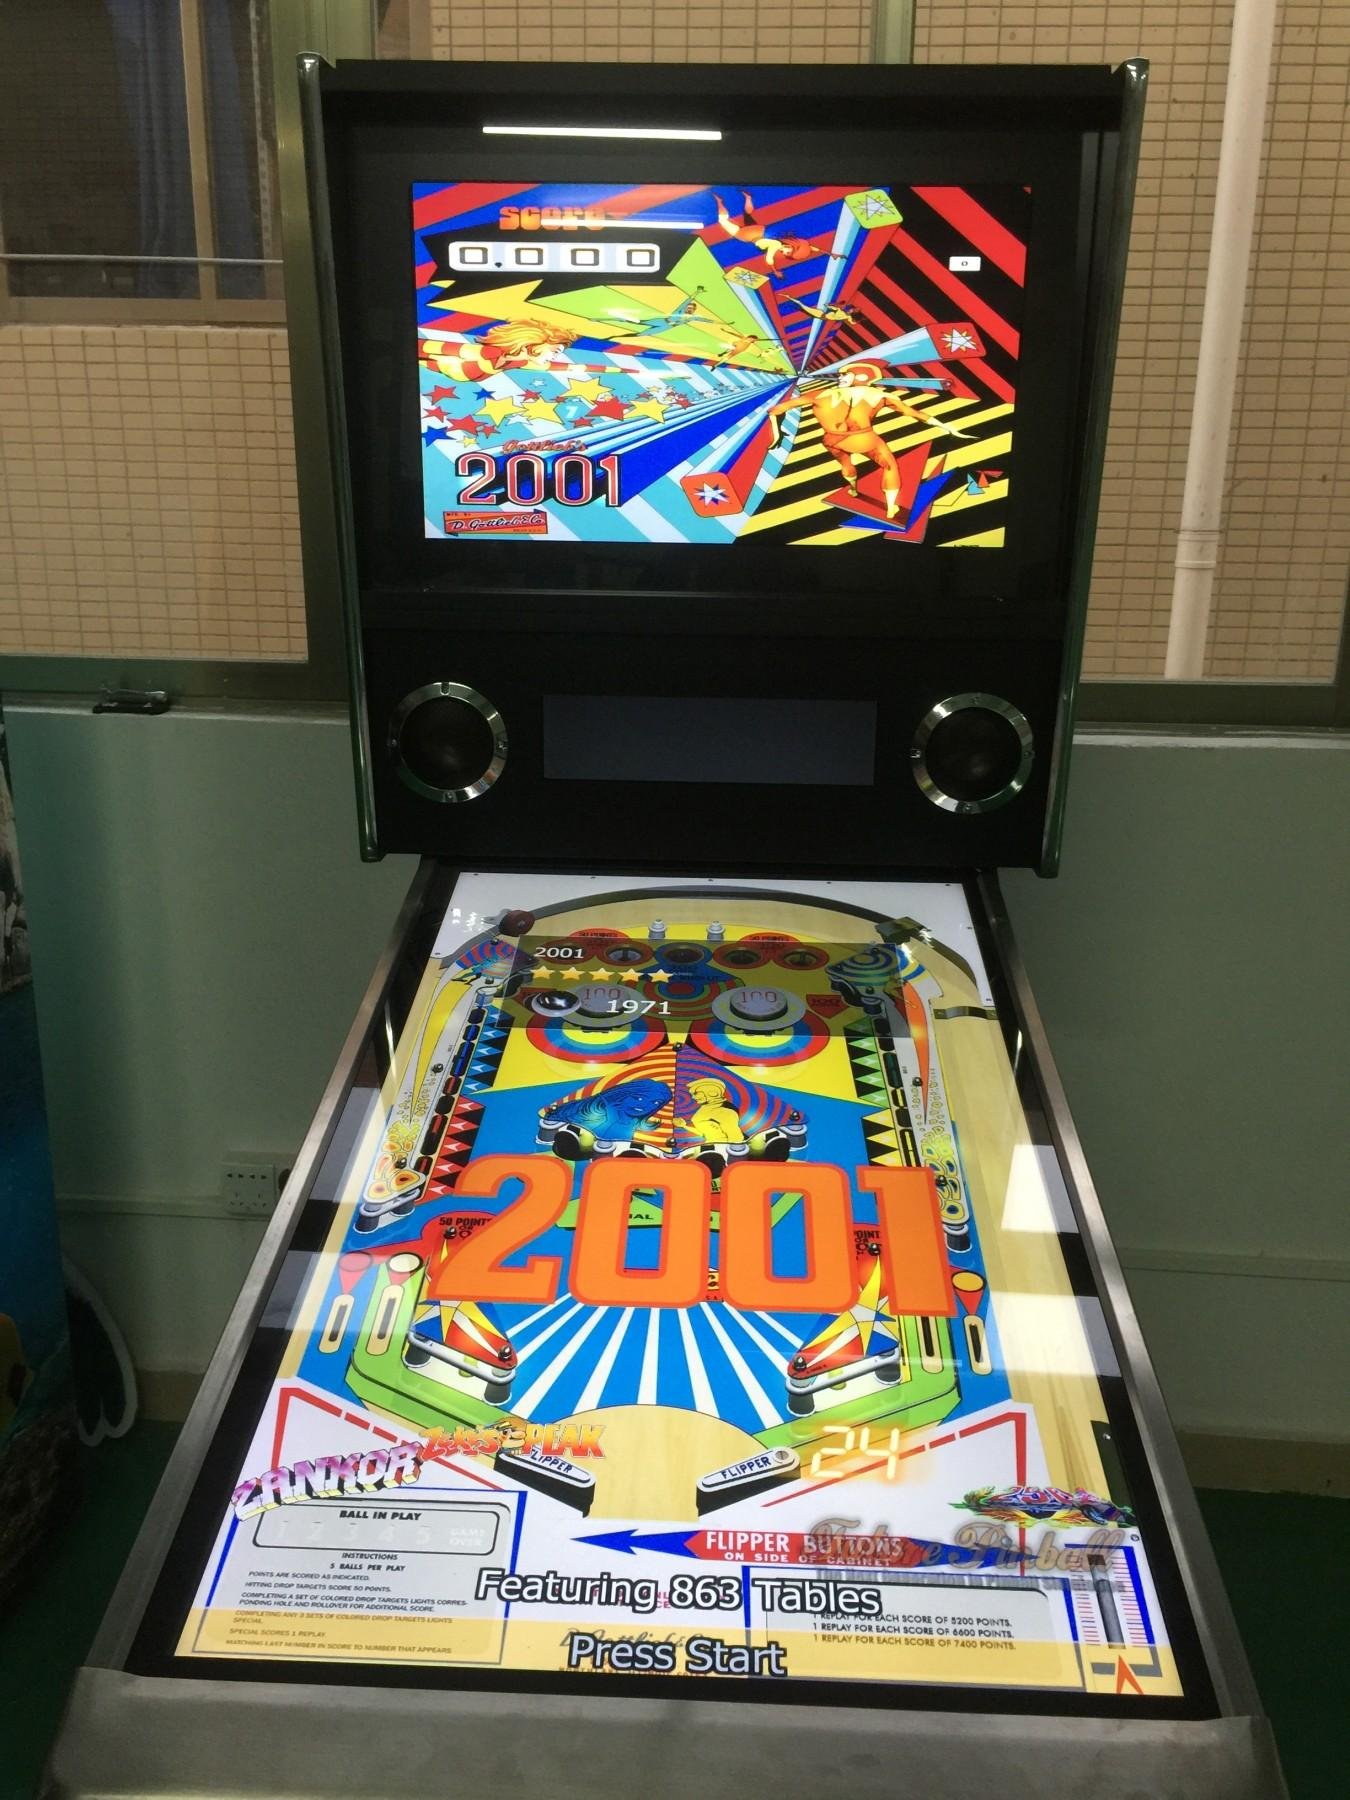 49inch Coin Operated Video Virtual Pinball With Classics Games 3